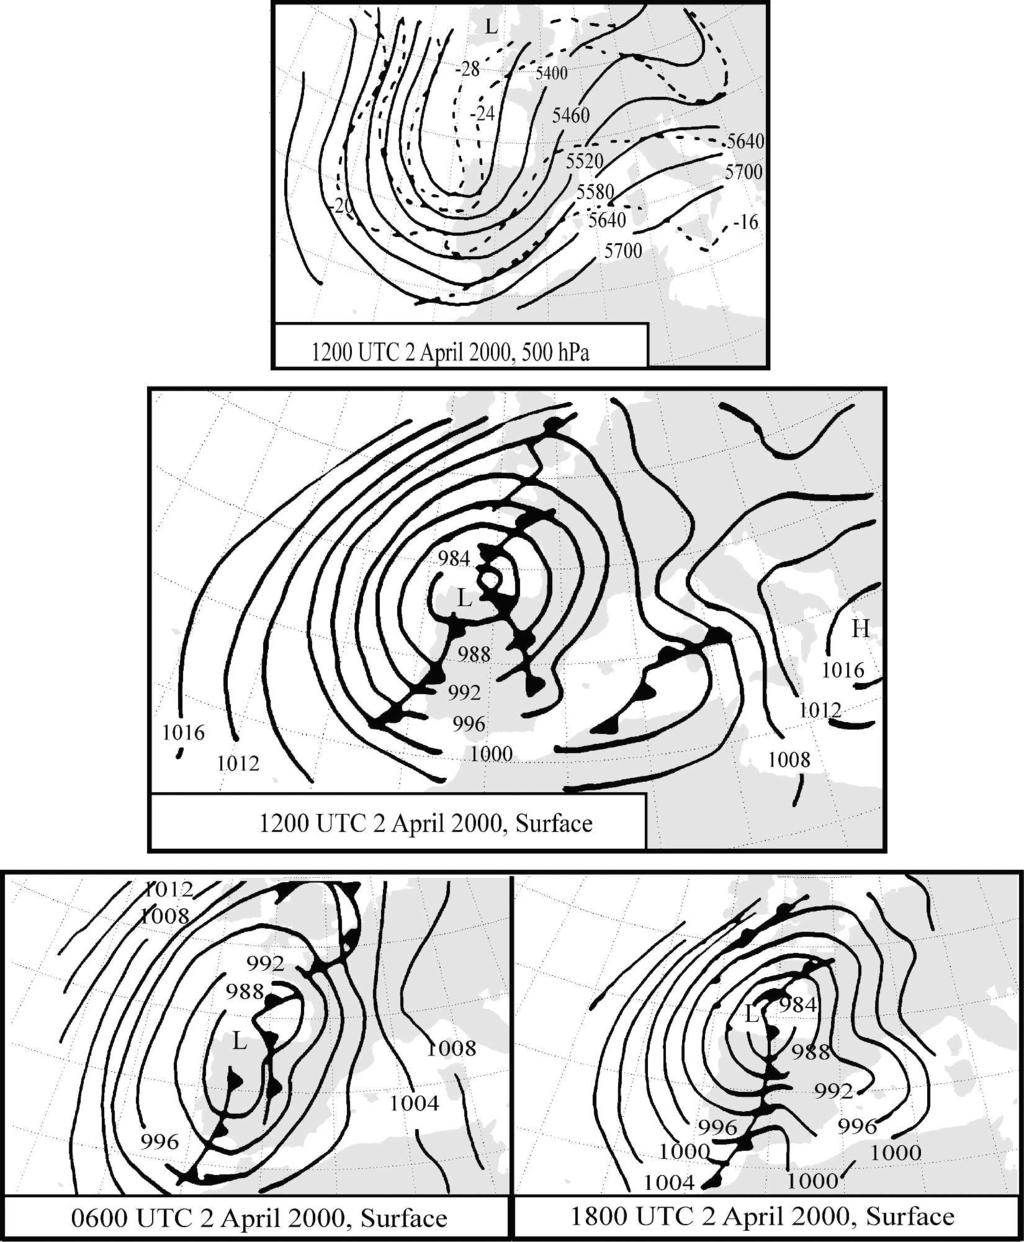 15 JULY 2005 M I L L Á N ET AL. 2687 FIG. 4. Synoptic conditions typical of an Atlantic frontal system crossing the Iberian Peninsula. precipitation events.